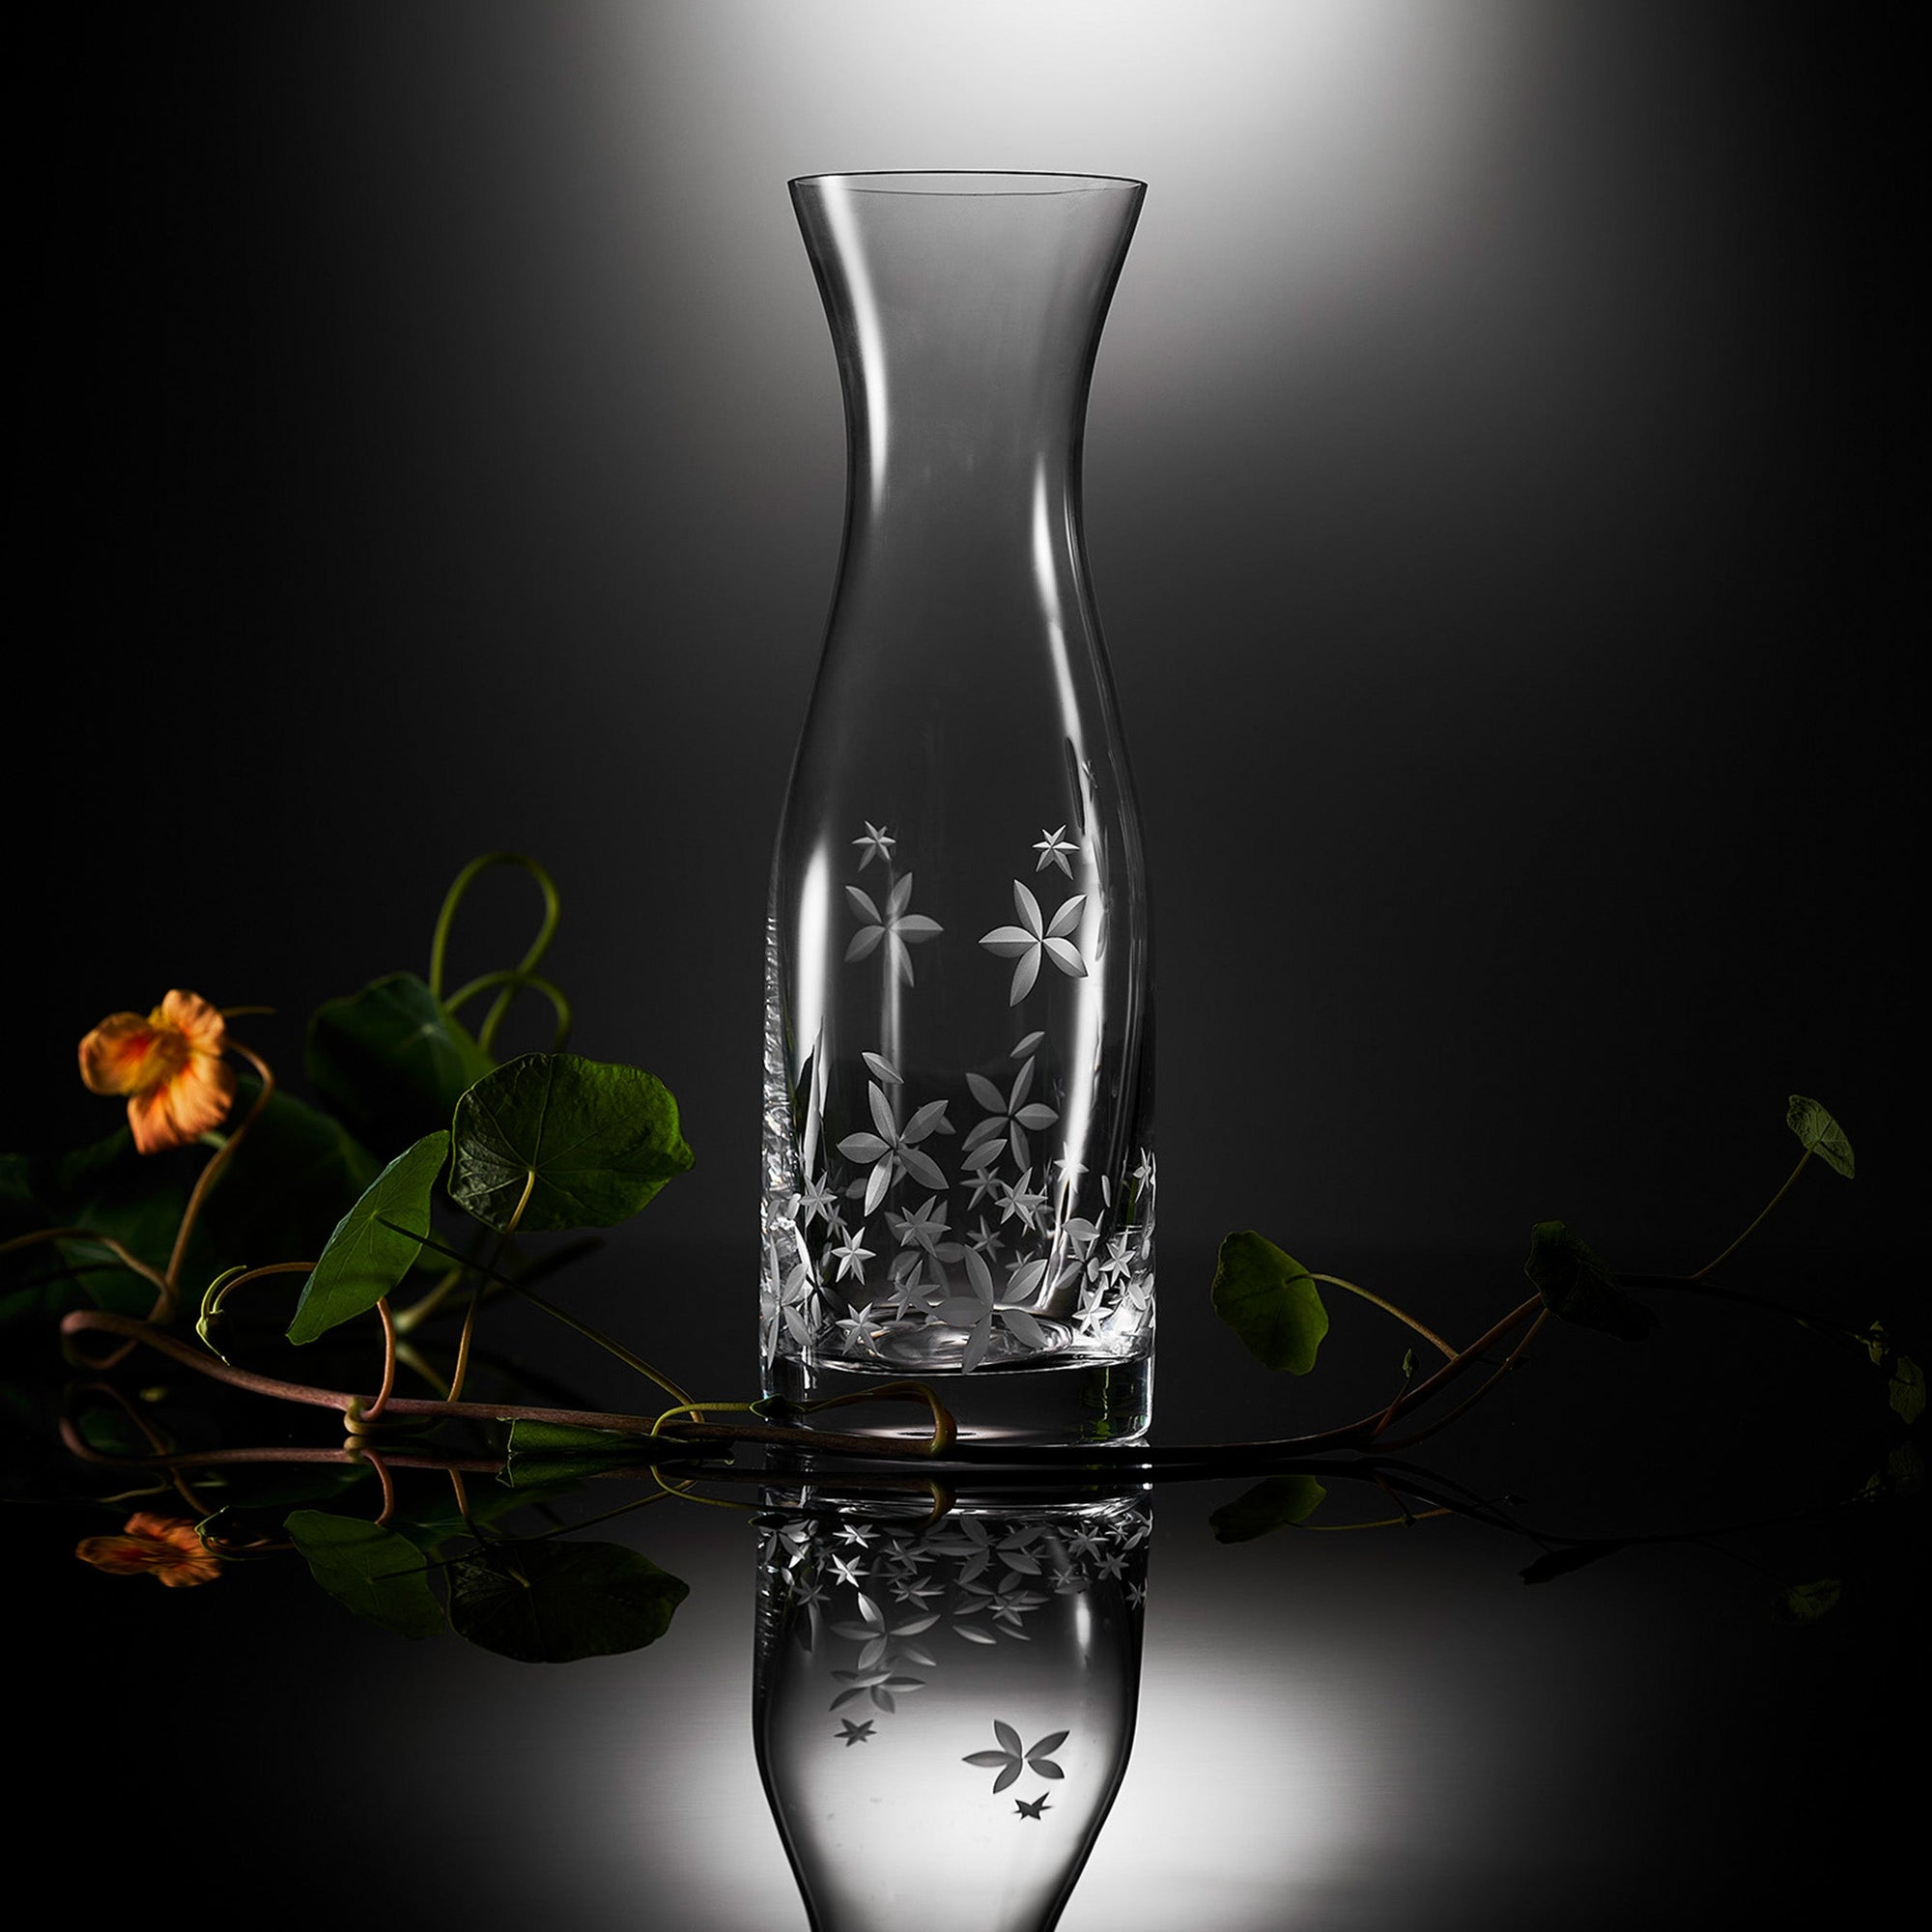 Chatham Bloom etched floral crystal Carafe from Caskata.